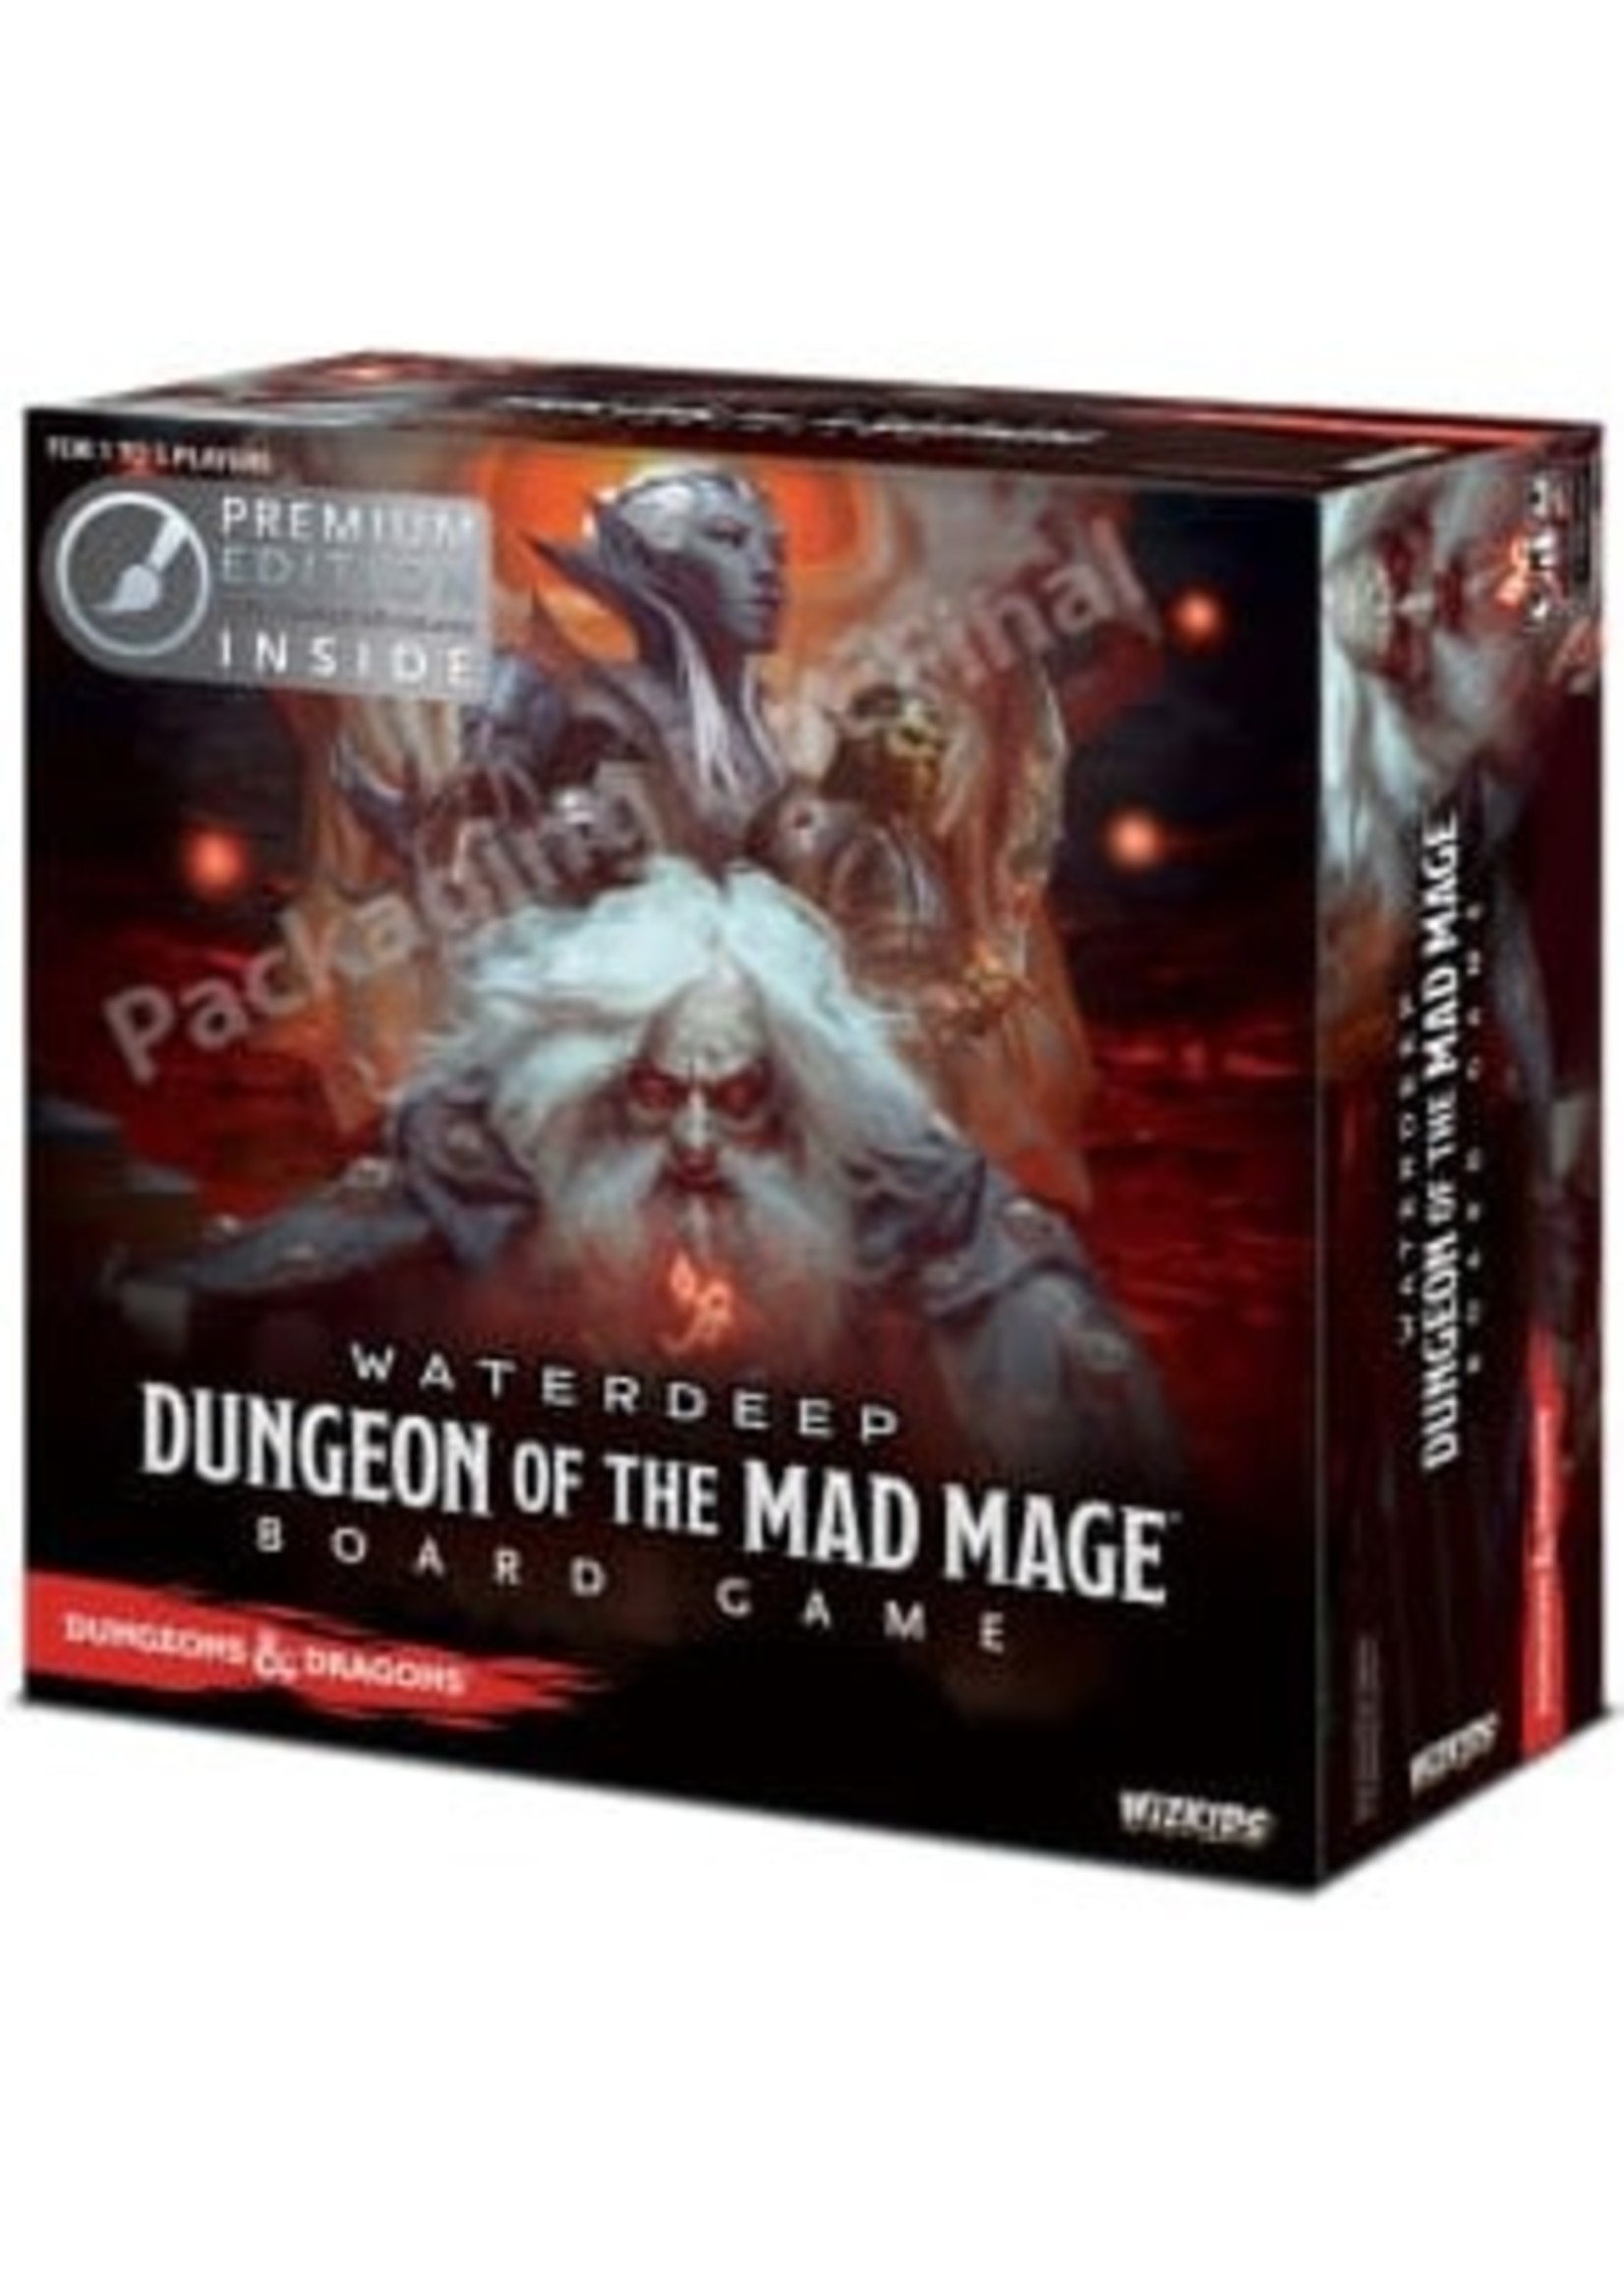 WizKids Waterdeep: Dungeon of the Mad Mage - Premium Edition (painted miniatures) - Dungeons & Dragons Board Game